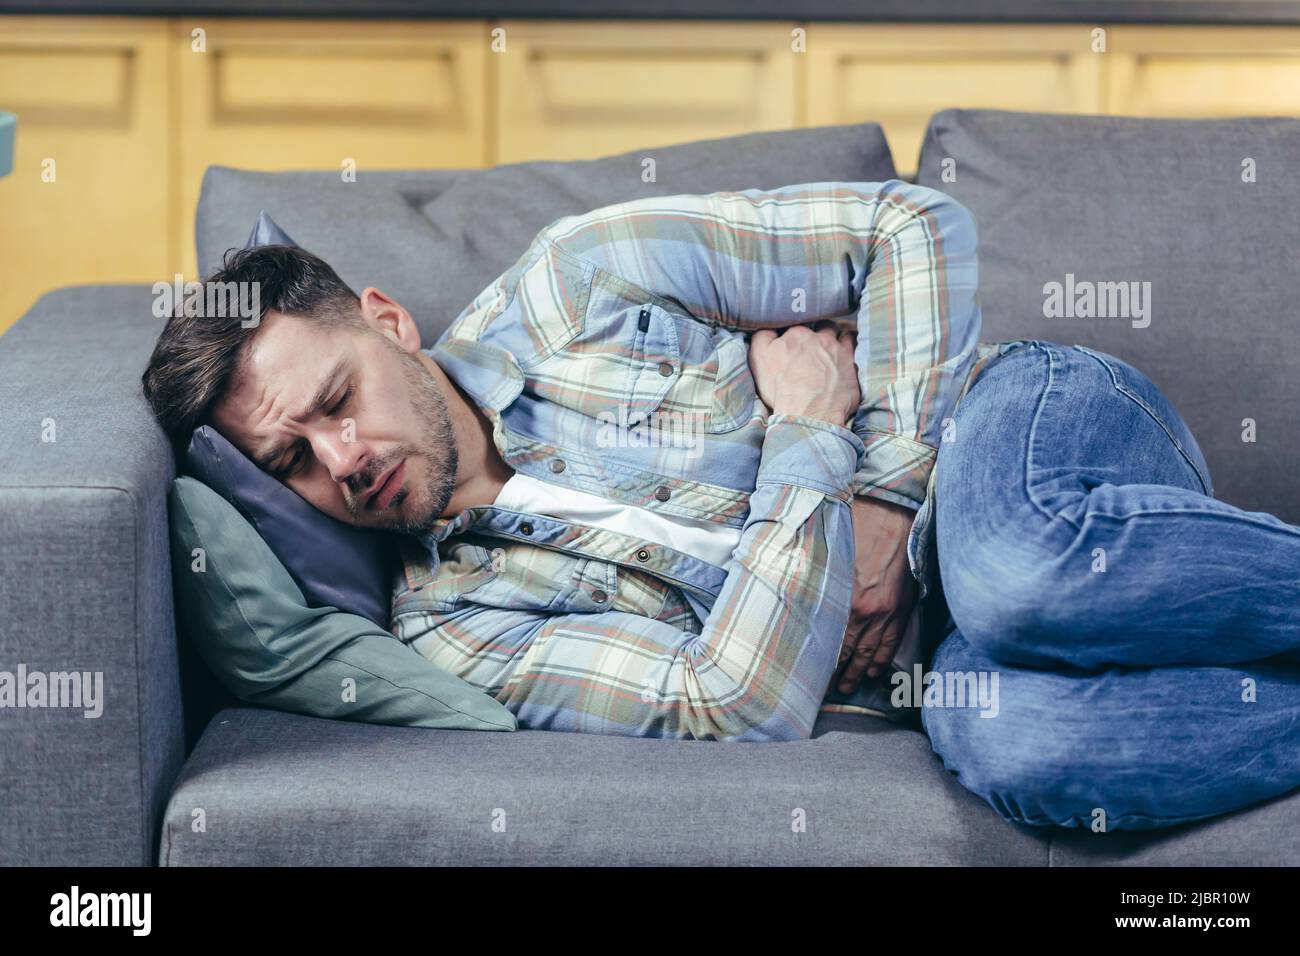 The sick man lying on the couch at home has severe abdominal pain Stock Photo